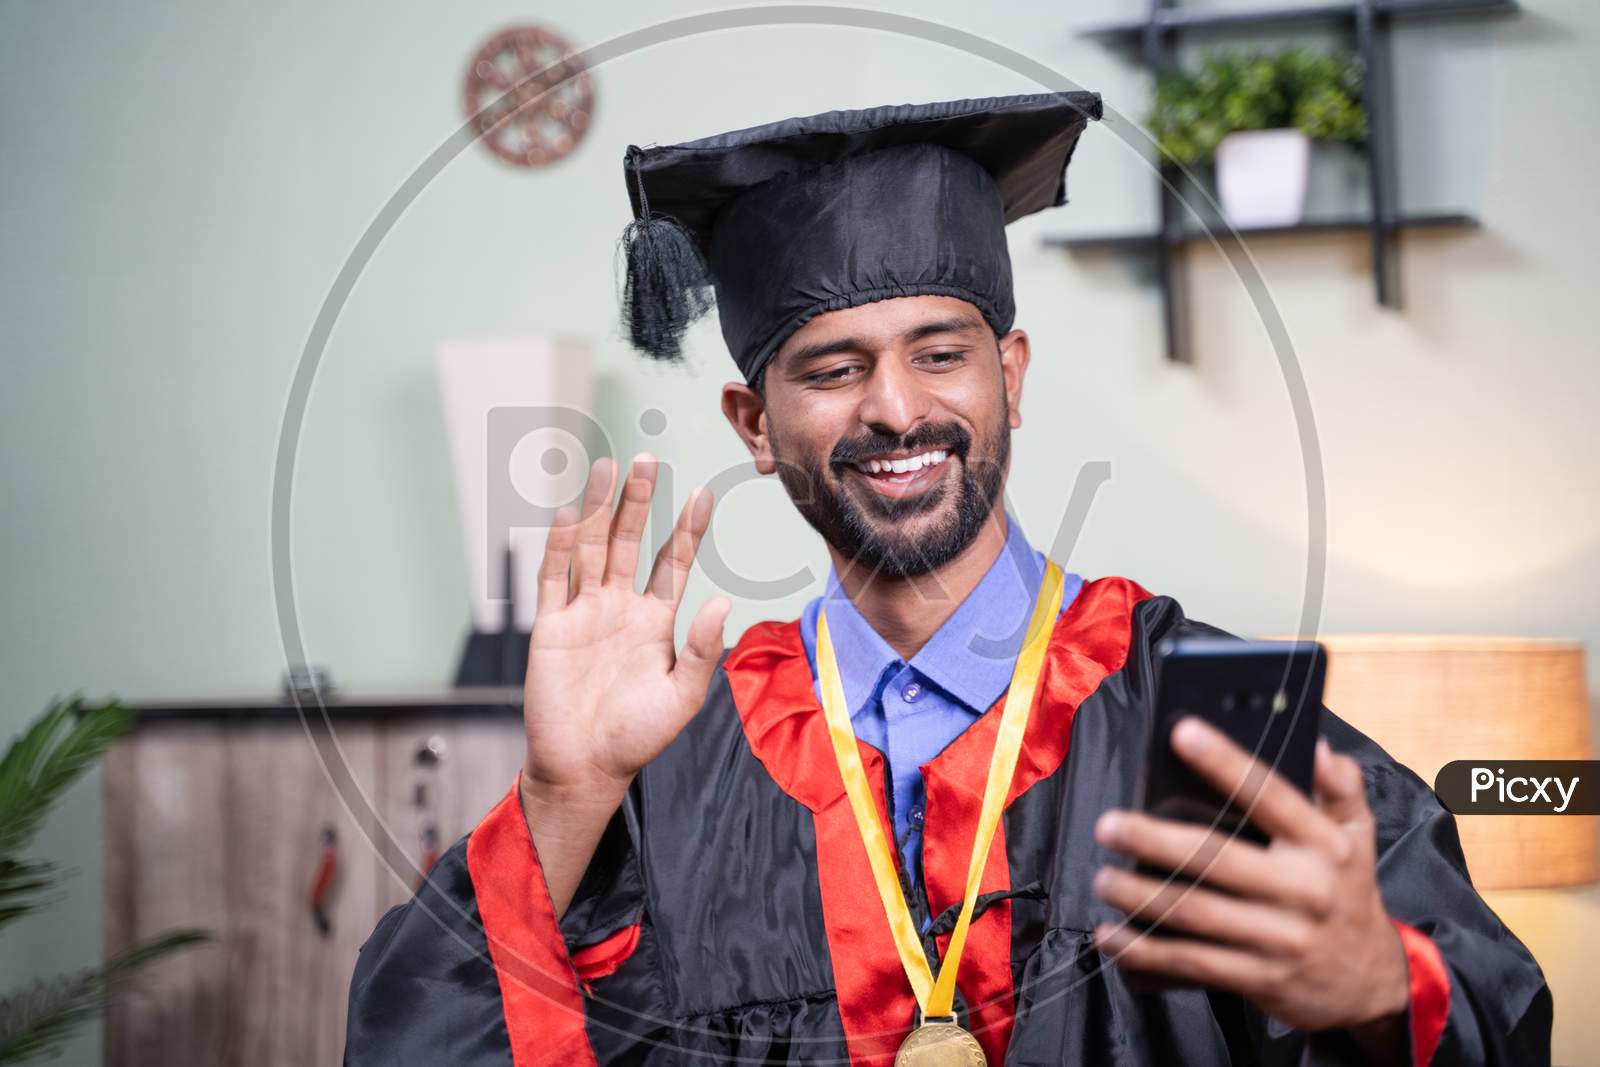 Student Attending His Online Video Graduation Celebration From Mobile Phone In Graduation Dress - Concept Of Virtual Celebrations, New Normal During Coronavirus Or Covid-19 Pandemic